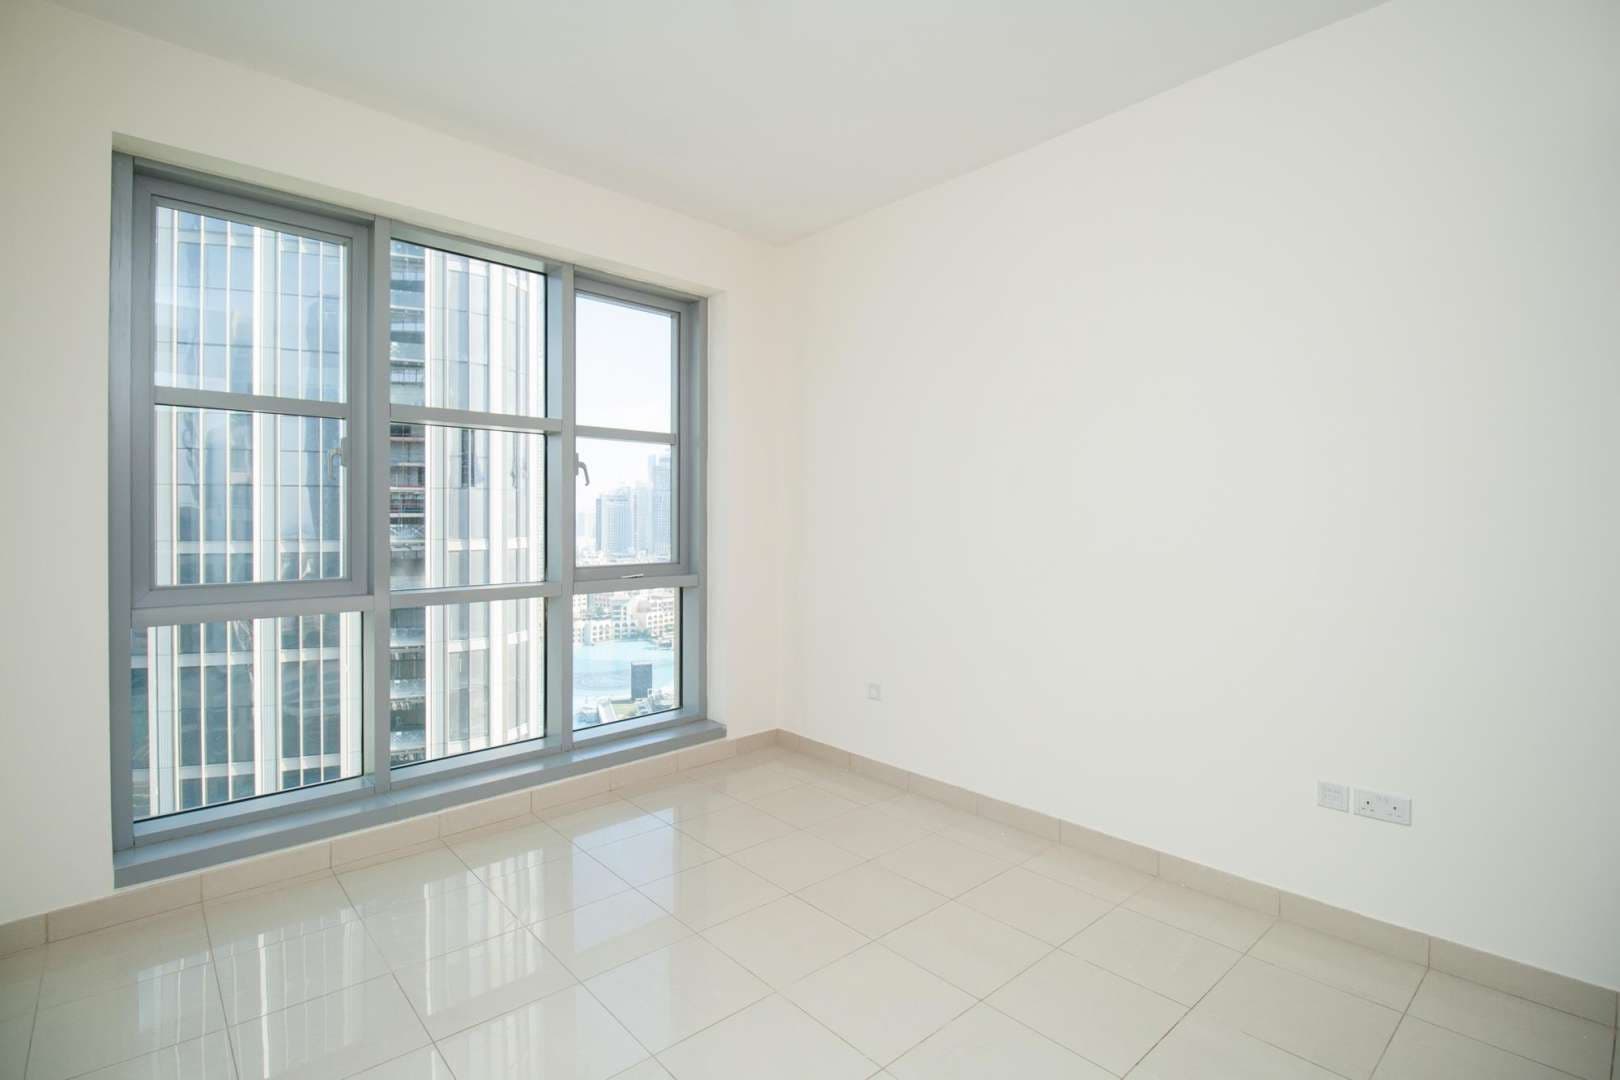 2 Bedroom Apartment For Sale Standpoint Tower A Lp05394 1f3328e7cc4e6200.jpg